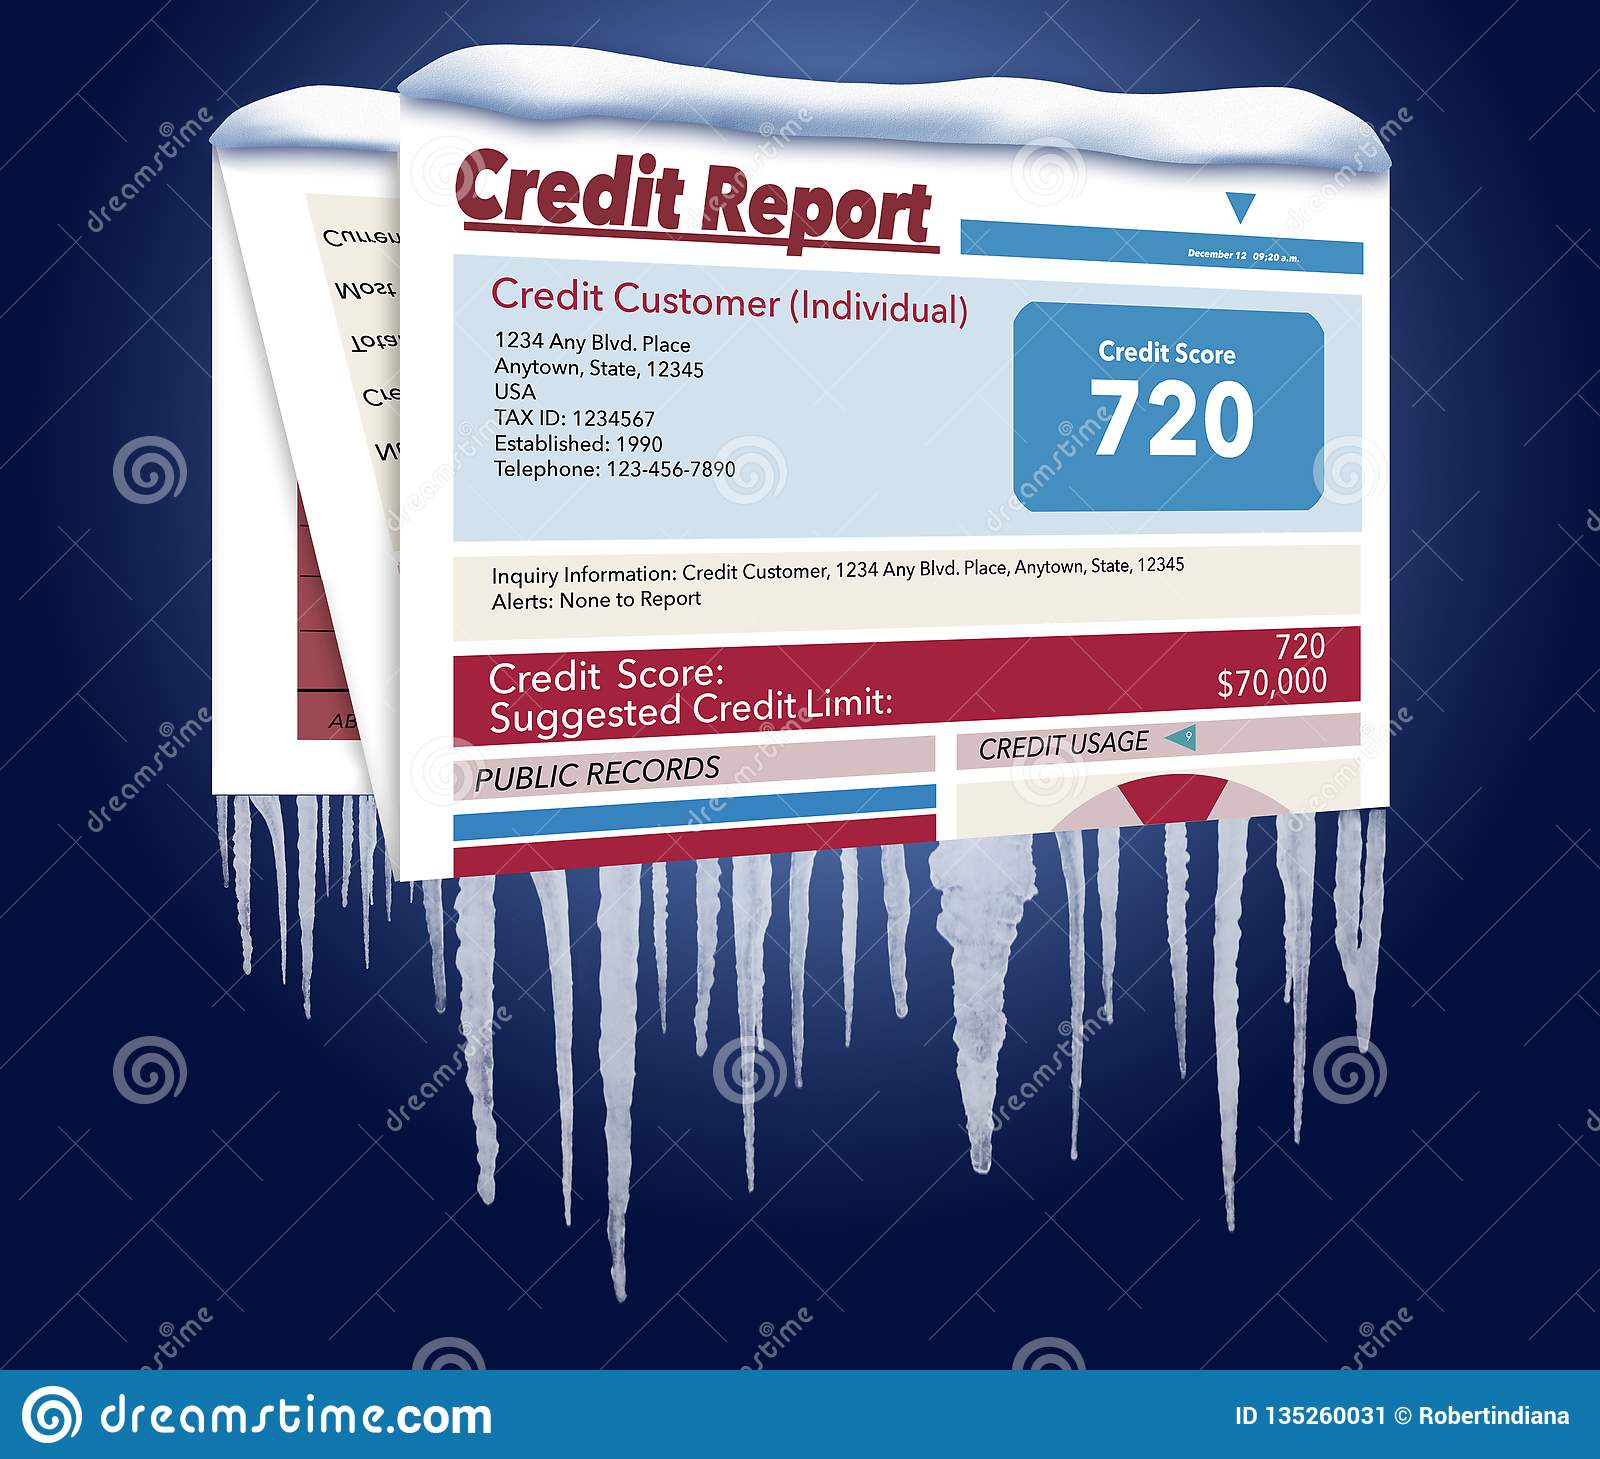 An Icy, Snow Covered Credit Report In A Snowstorm Illustrates The Idea ...